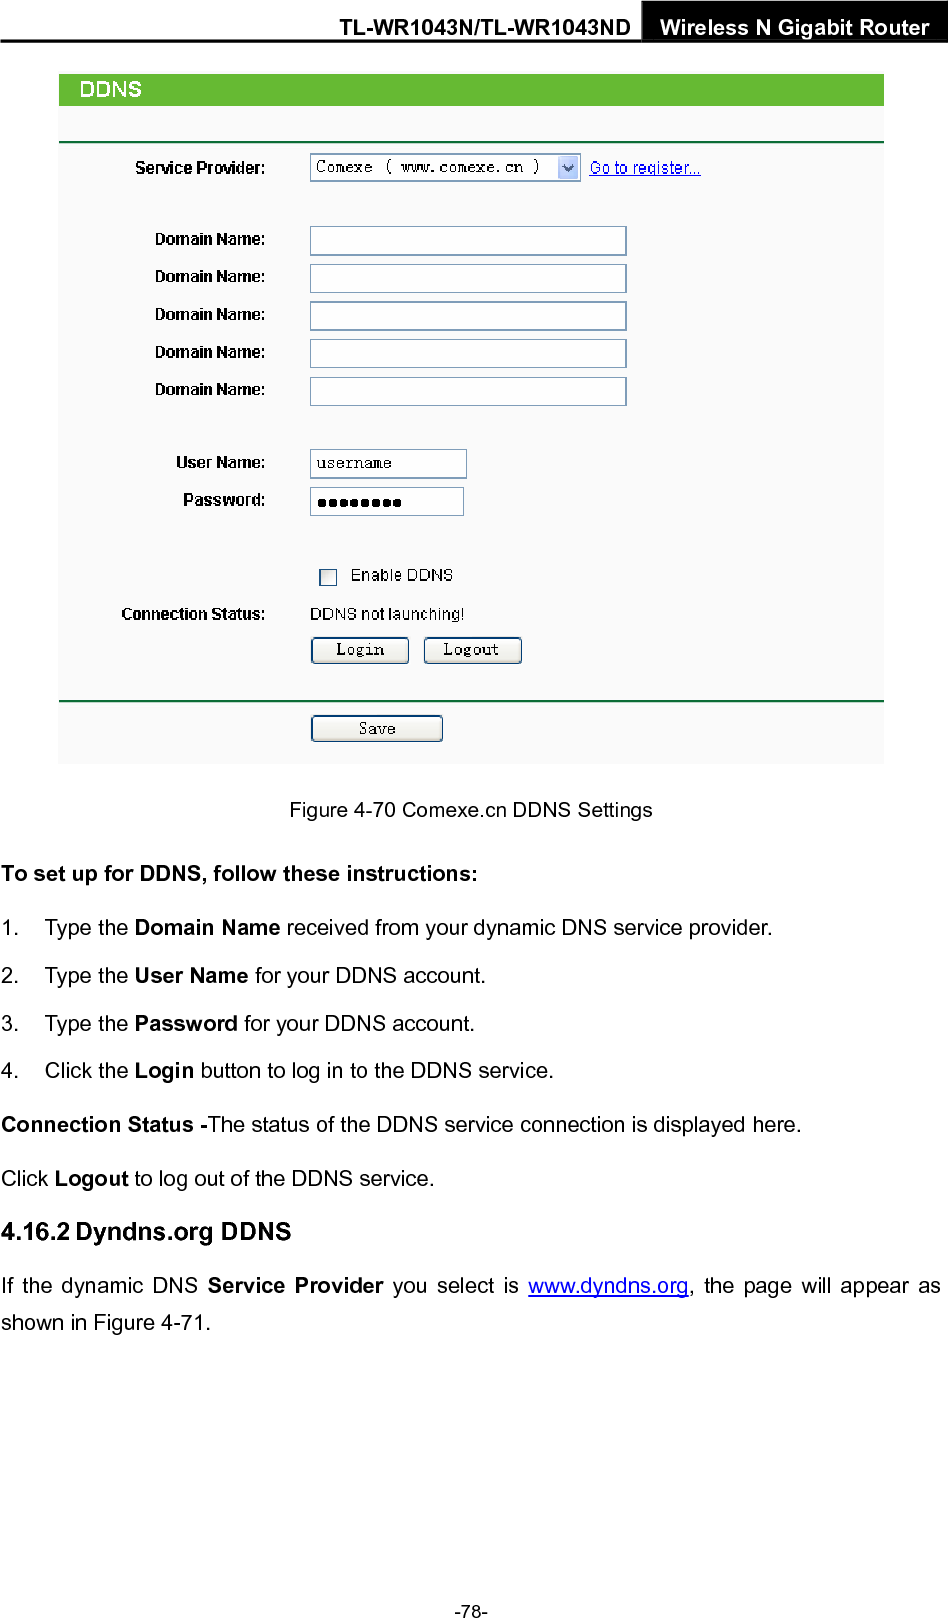 TL-WR1043N/TL-WR1043ND Wireless N Gigabit Router  Figure 4-70 Comexe.cn DDNS Settings To set up for DDNS, follow these instructions: 1. Type the Domain Name received from your dynamic DNS service provider.     2. Type the User Name for your DDNS account.   3. Type the Password for your DDNS account.   4. Click the Login button to log in to the DDNS service. Connection Status -The status of the DDNS service connection is displayed here. Click Logout to log out of the DDNS service.   4.16.2 Dyndns.org DDNS If the dynamic DNS Service Provider you select is www.dyndns.org, the page will appear as shown in Figure 4-71. -78- 